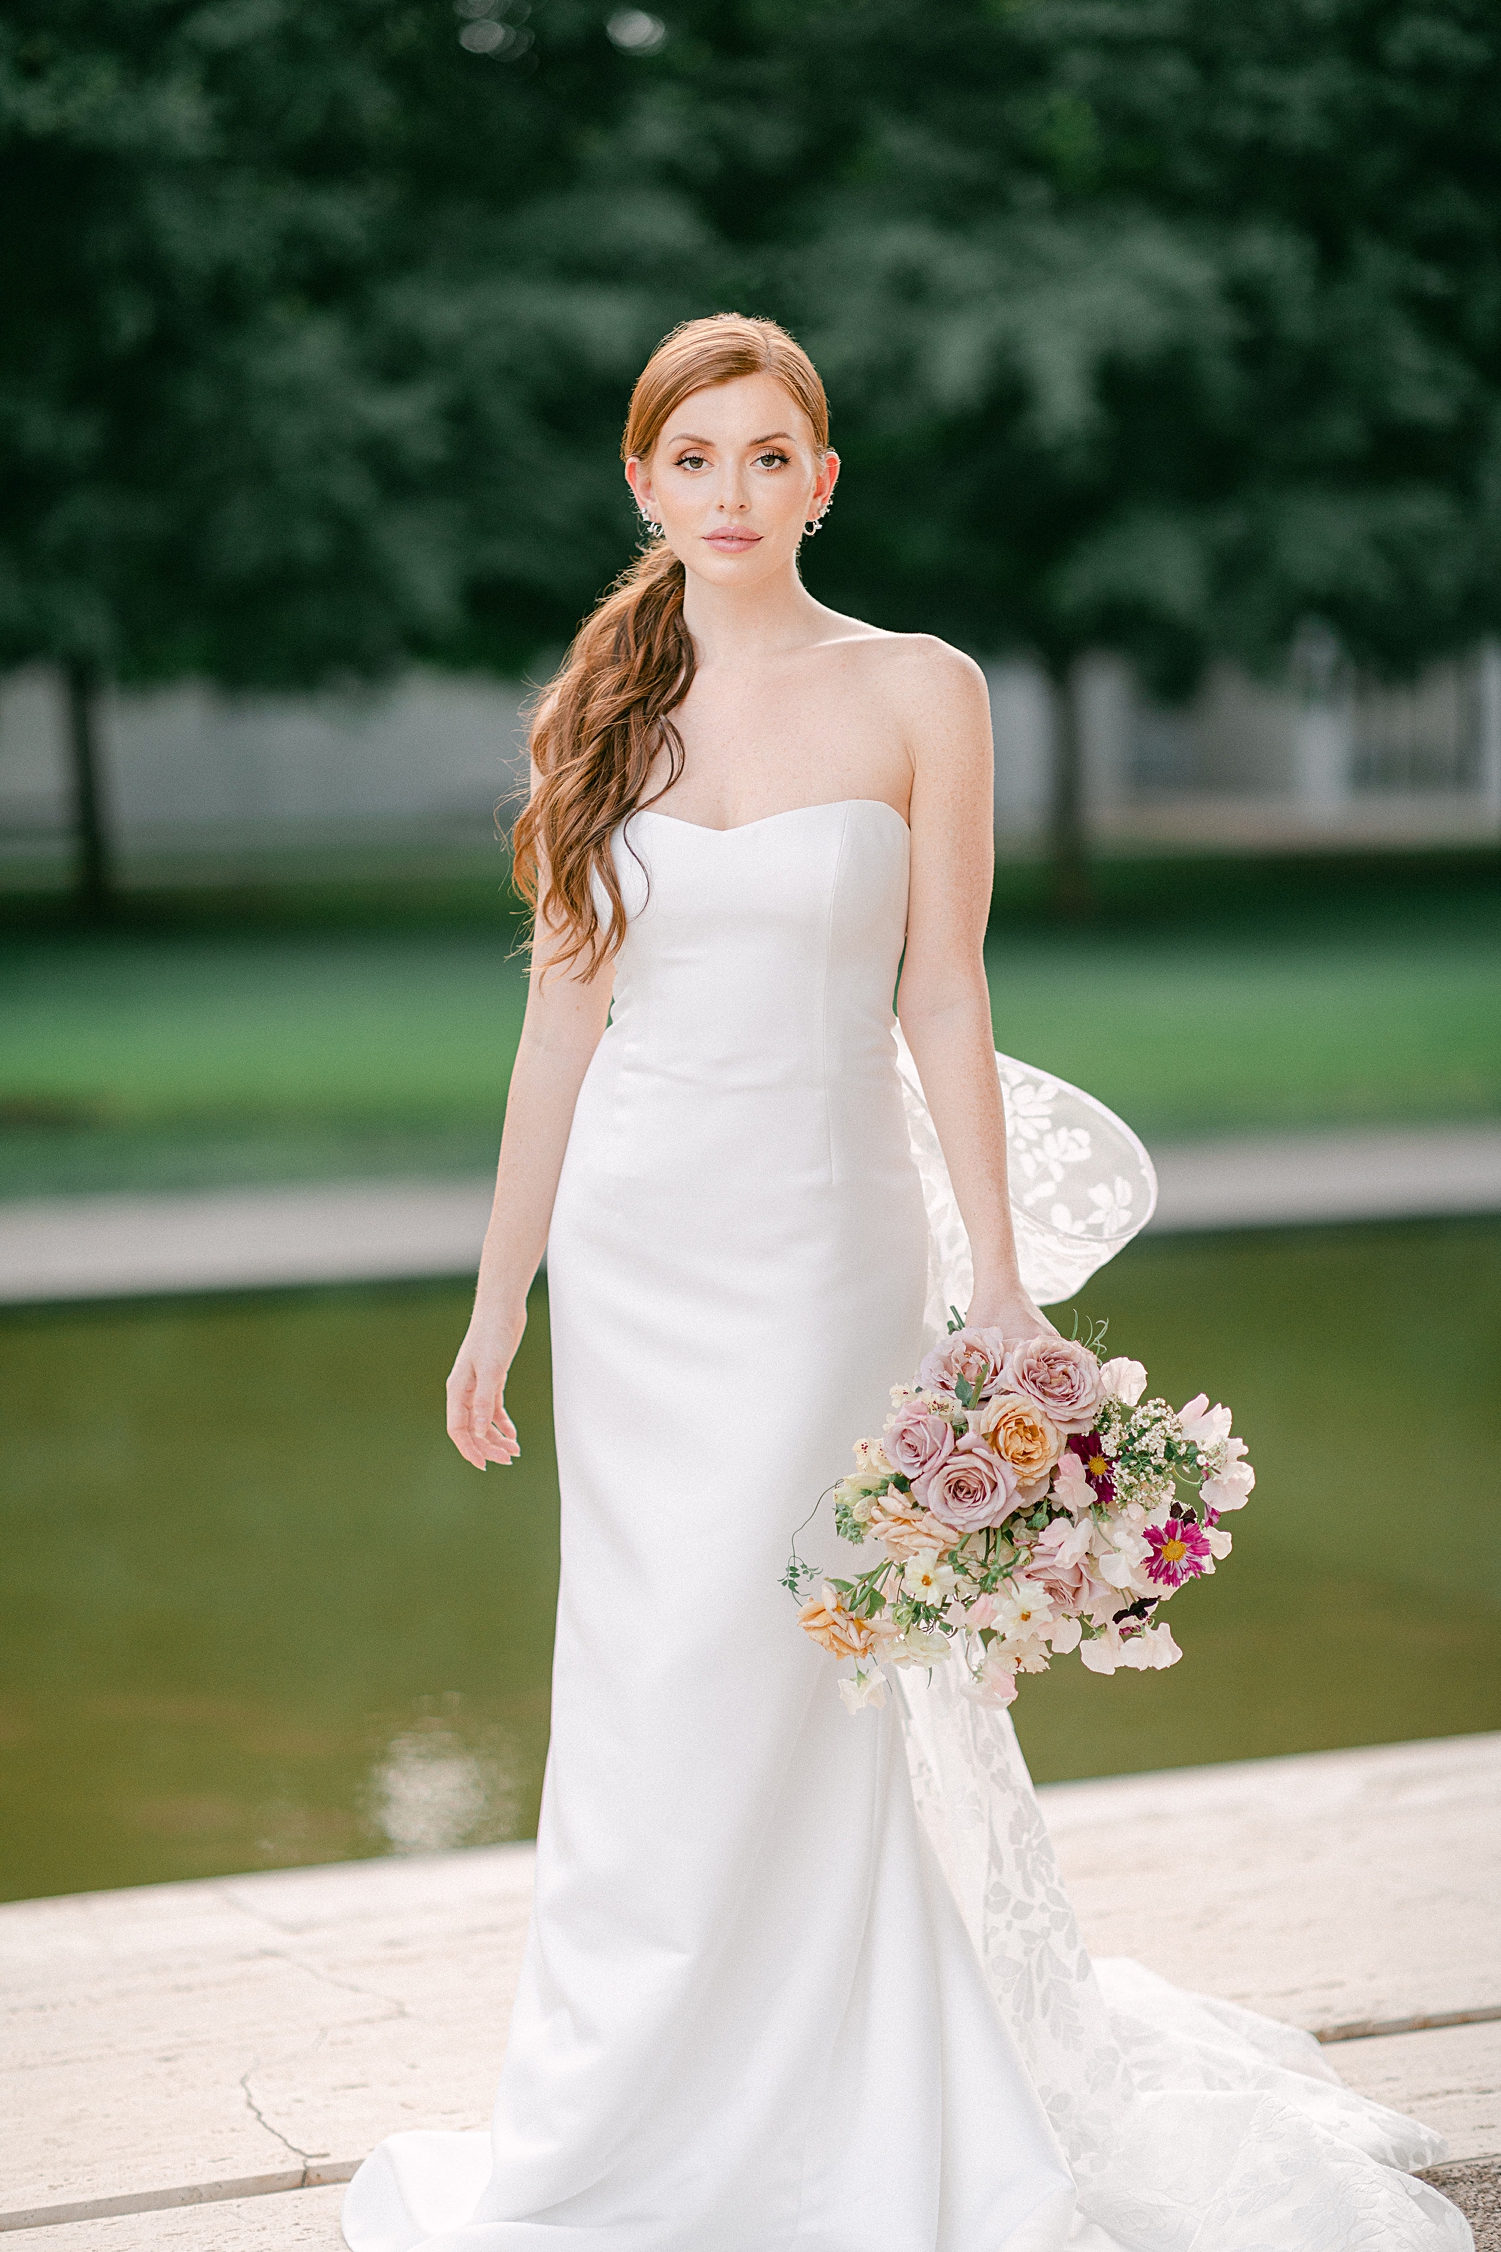 red headed girl in white wedding gown holding colorful floral bouquet